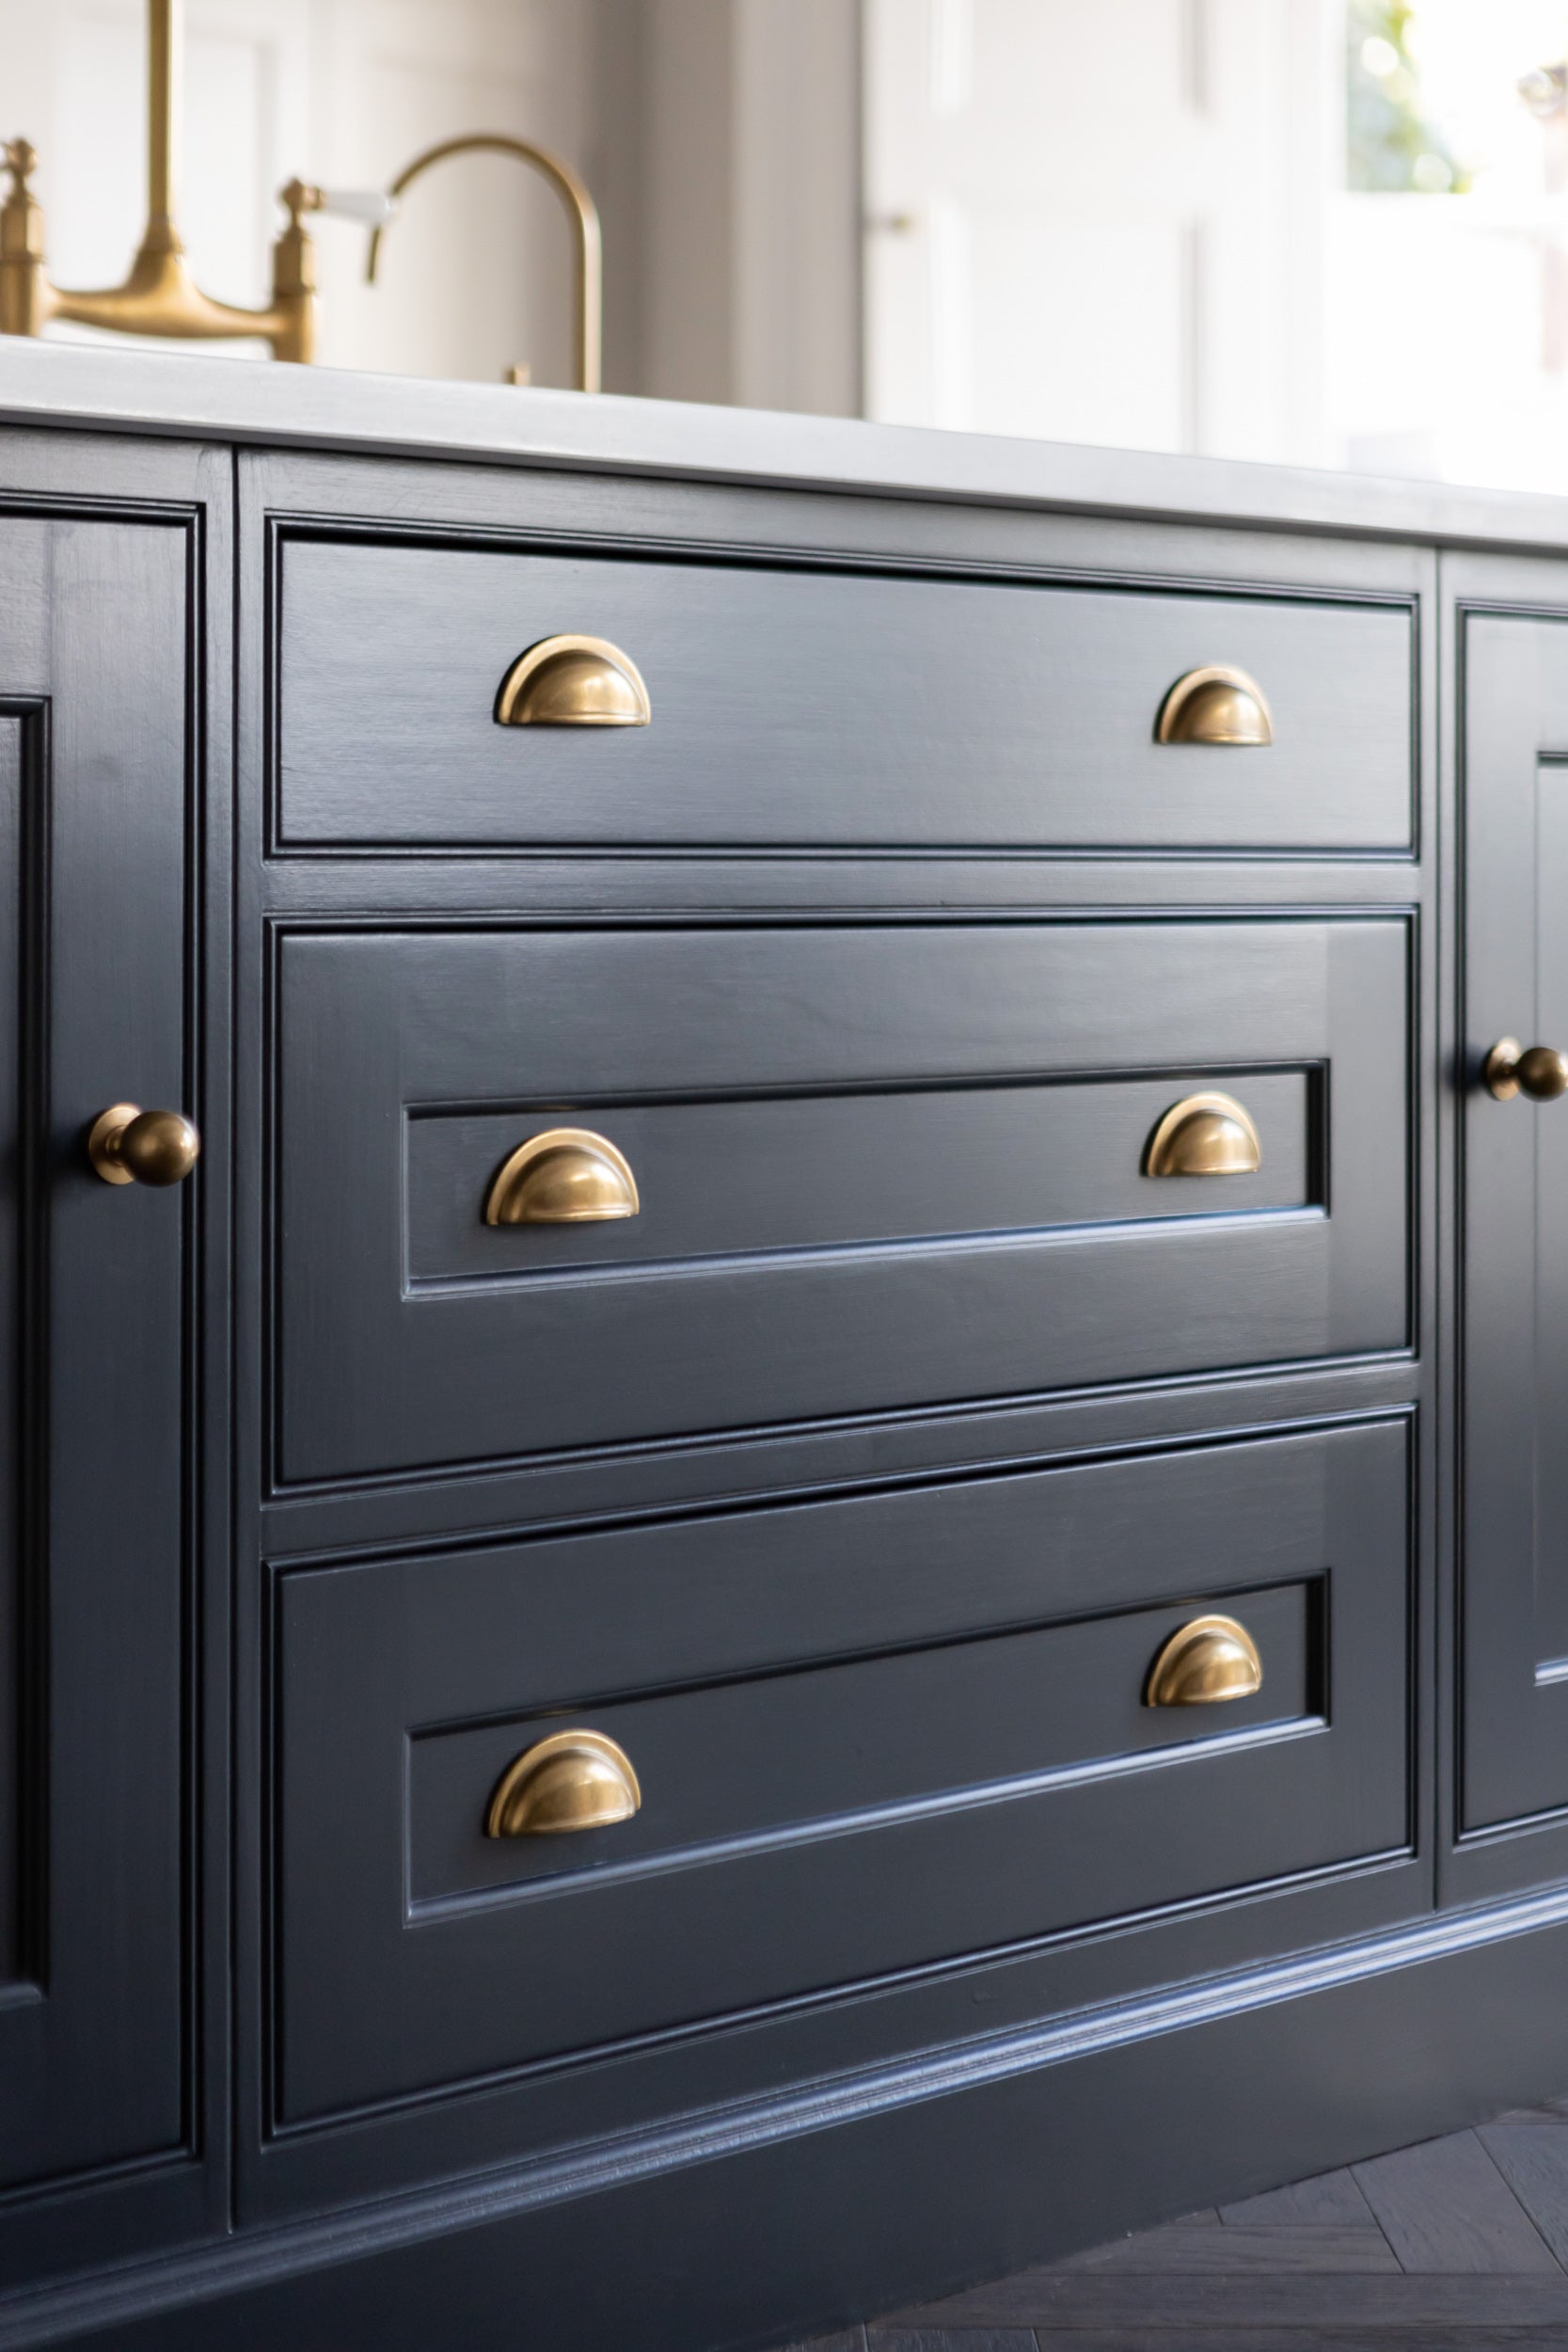 Gray kitchen pantry cabinets accented with brushed brass hardware